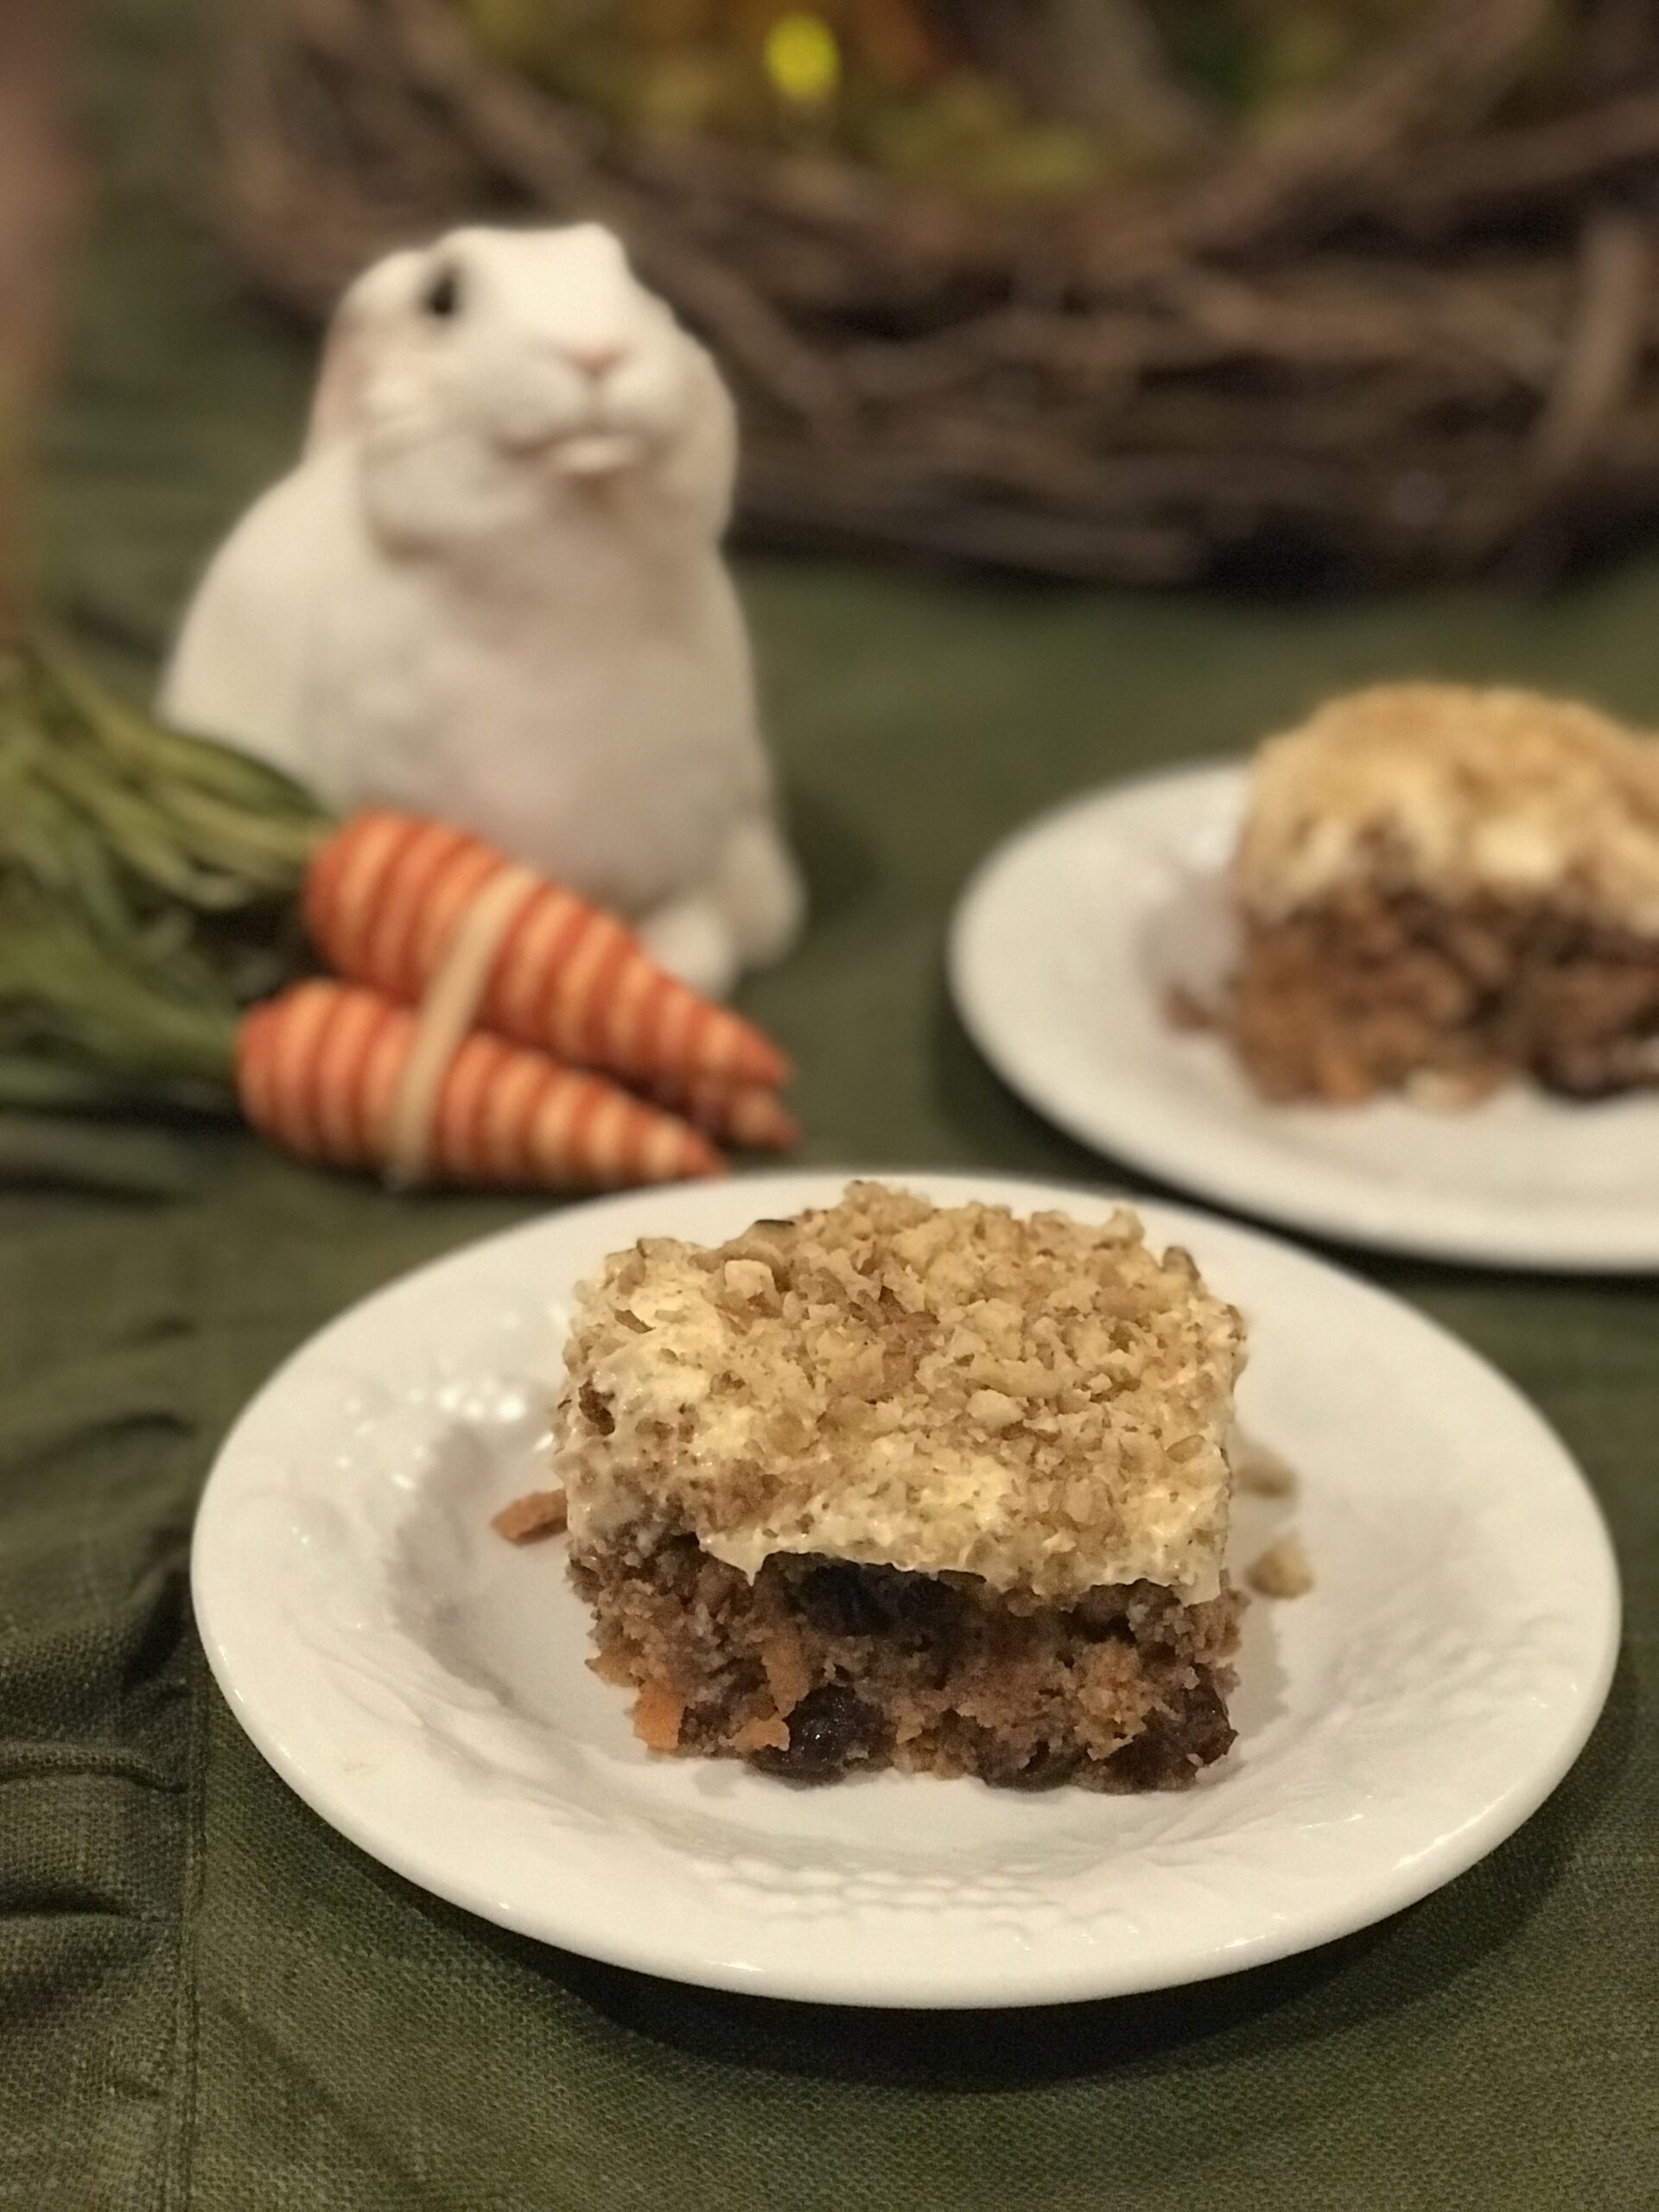 spiced carrot cake with bunny and carrots in the background